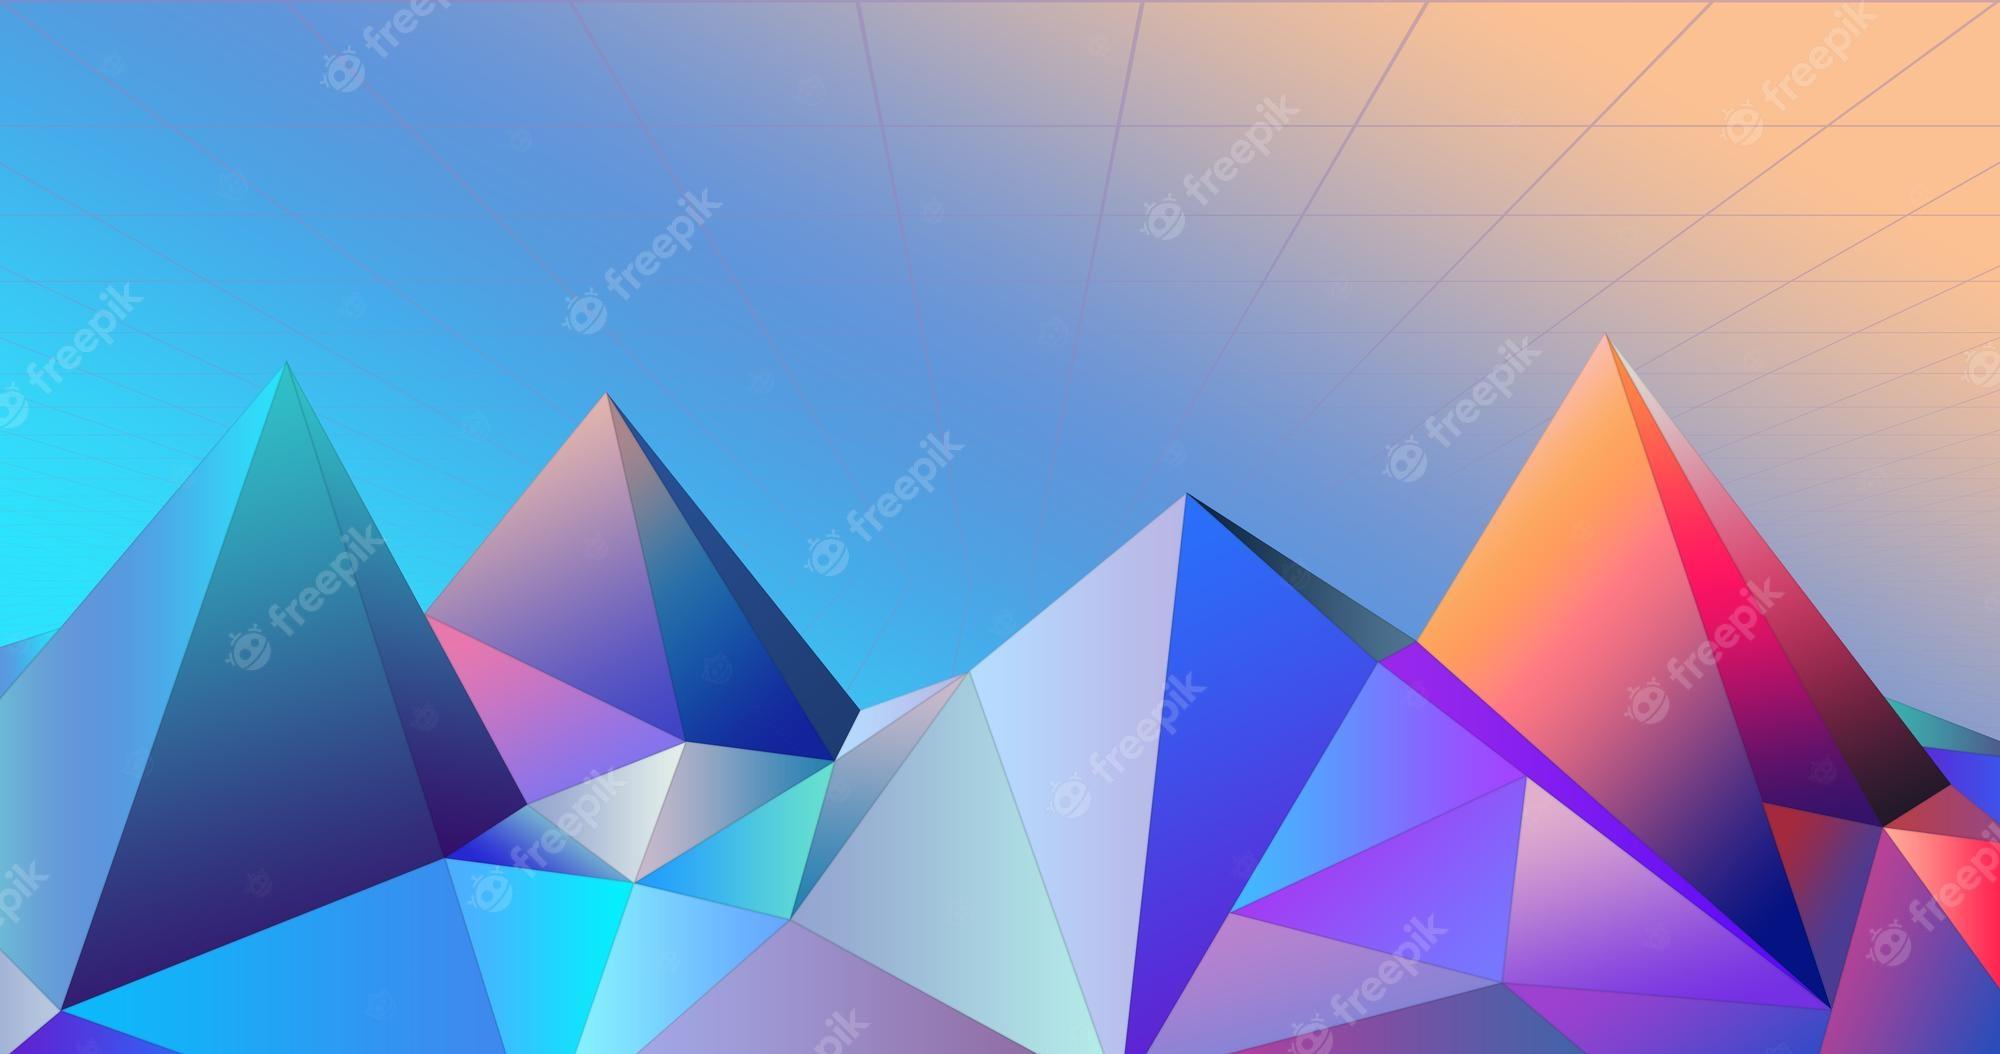 Premium Psd Modern Low Poly Landscape Abstract Background